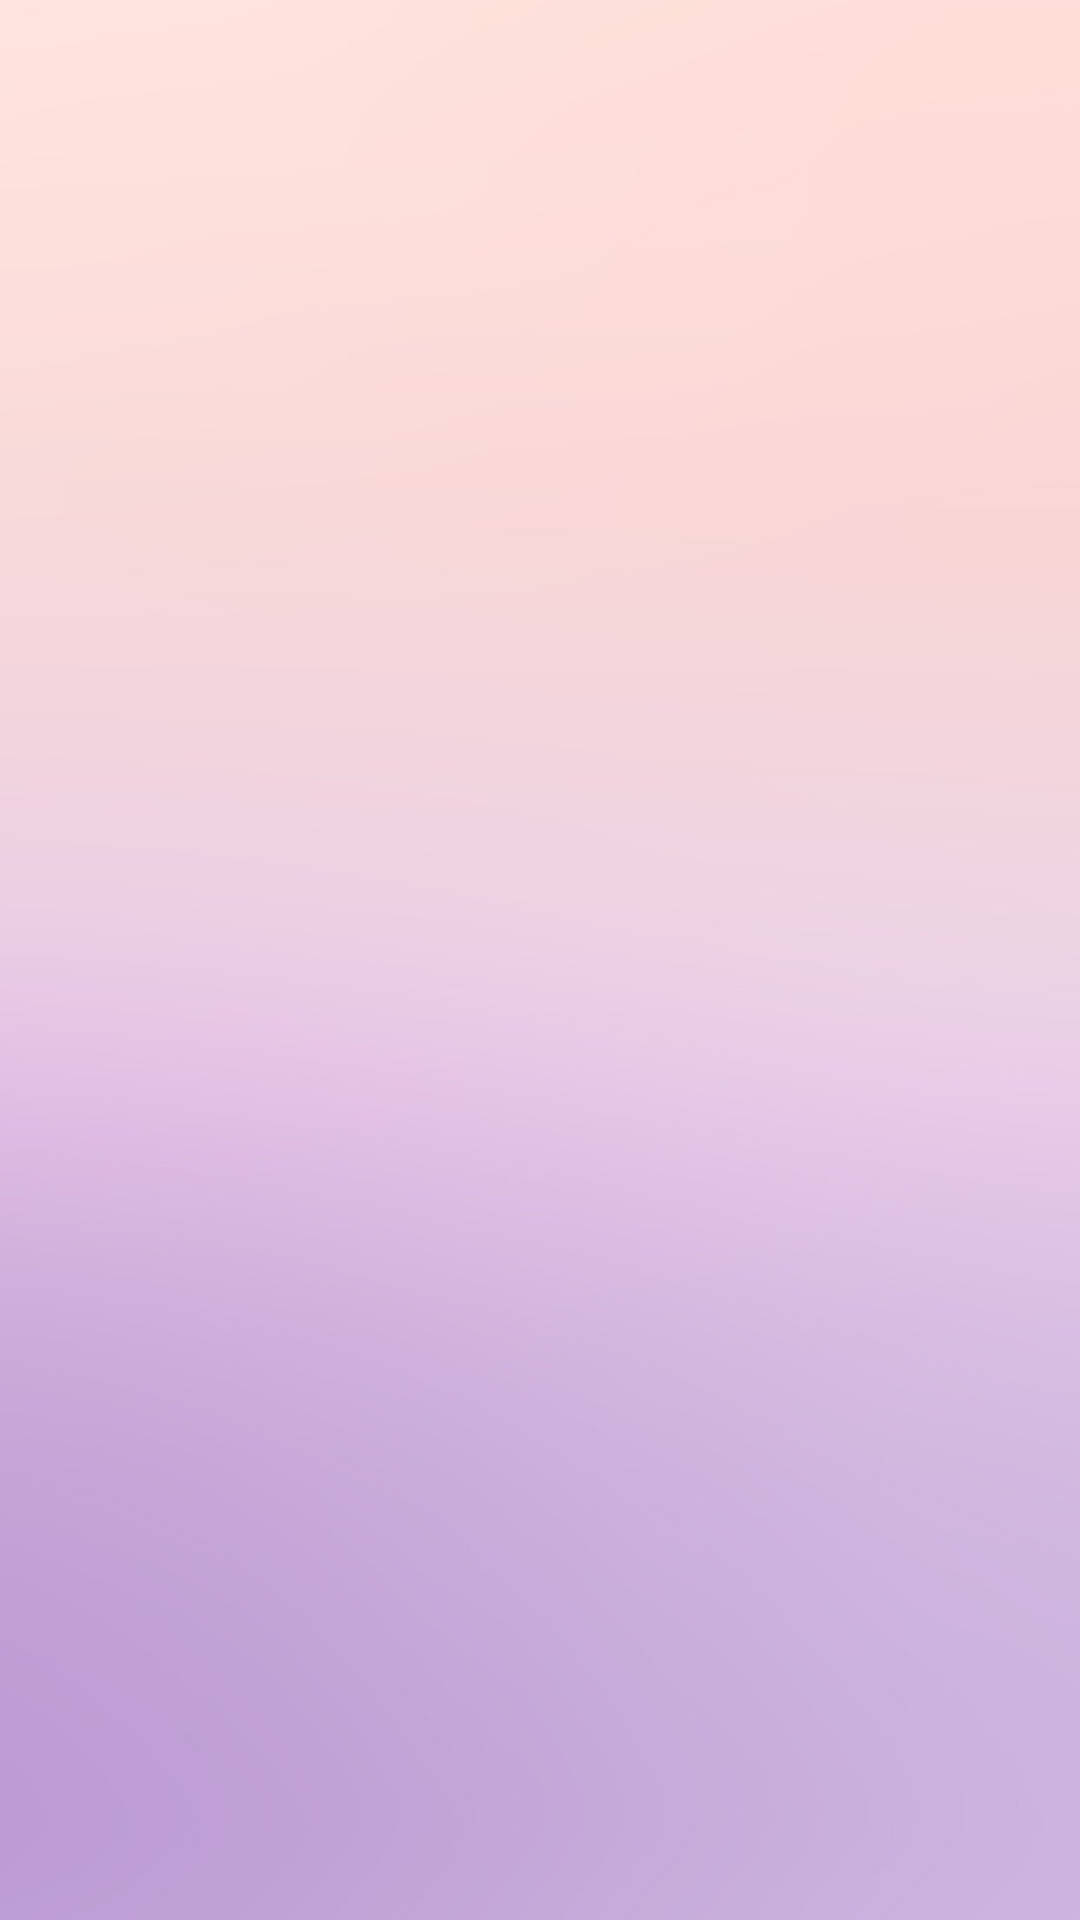 Gradient Pink And Light Purple Iphone Background